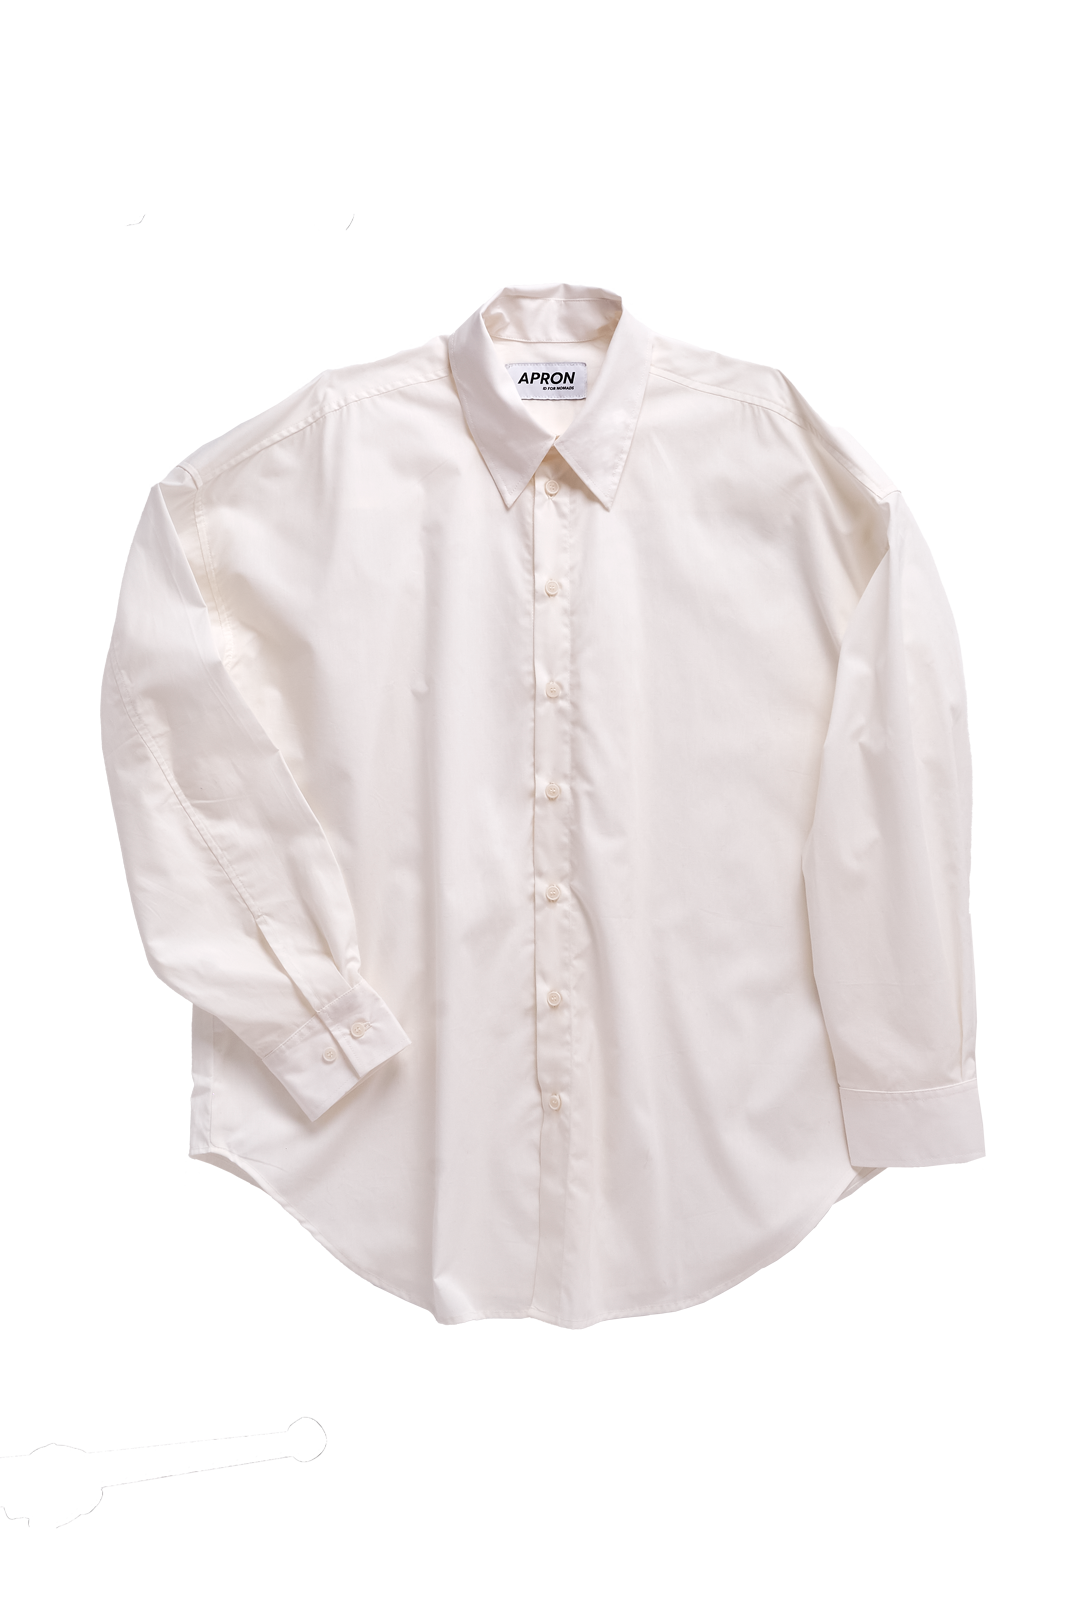 WHITE SHIRT AFTER SX N#4S0305